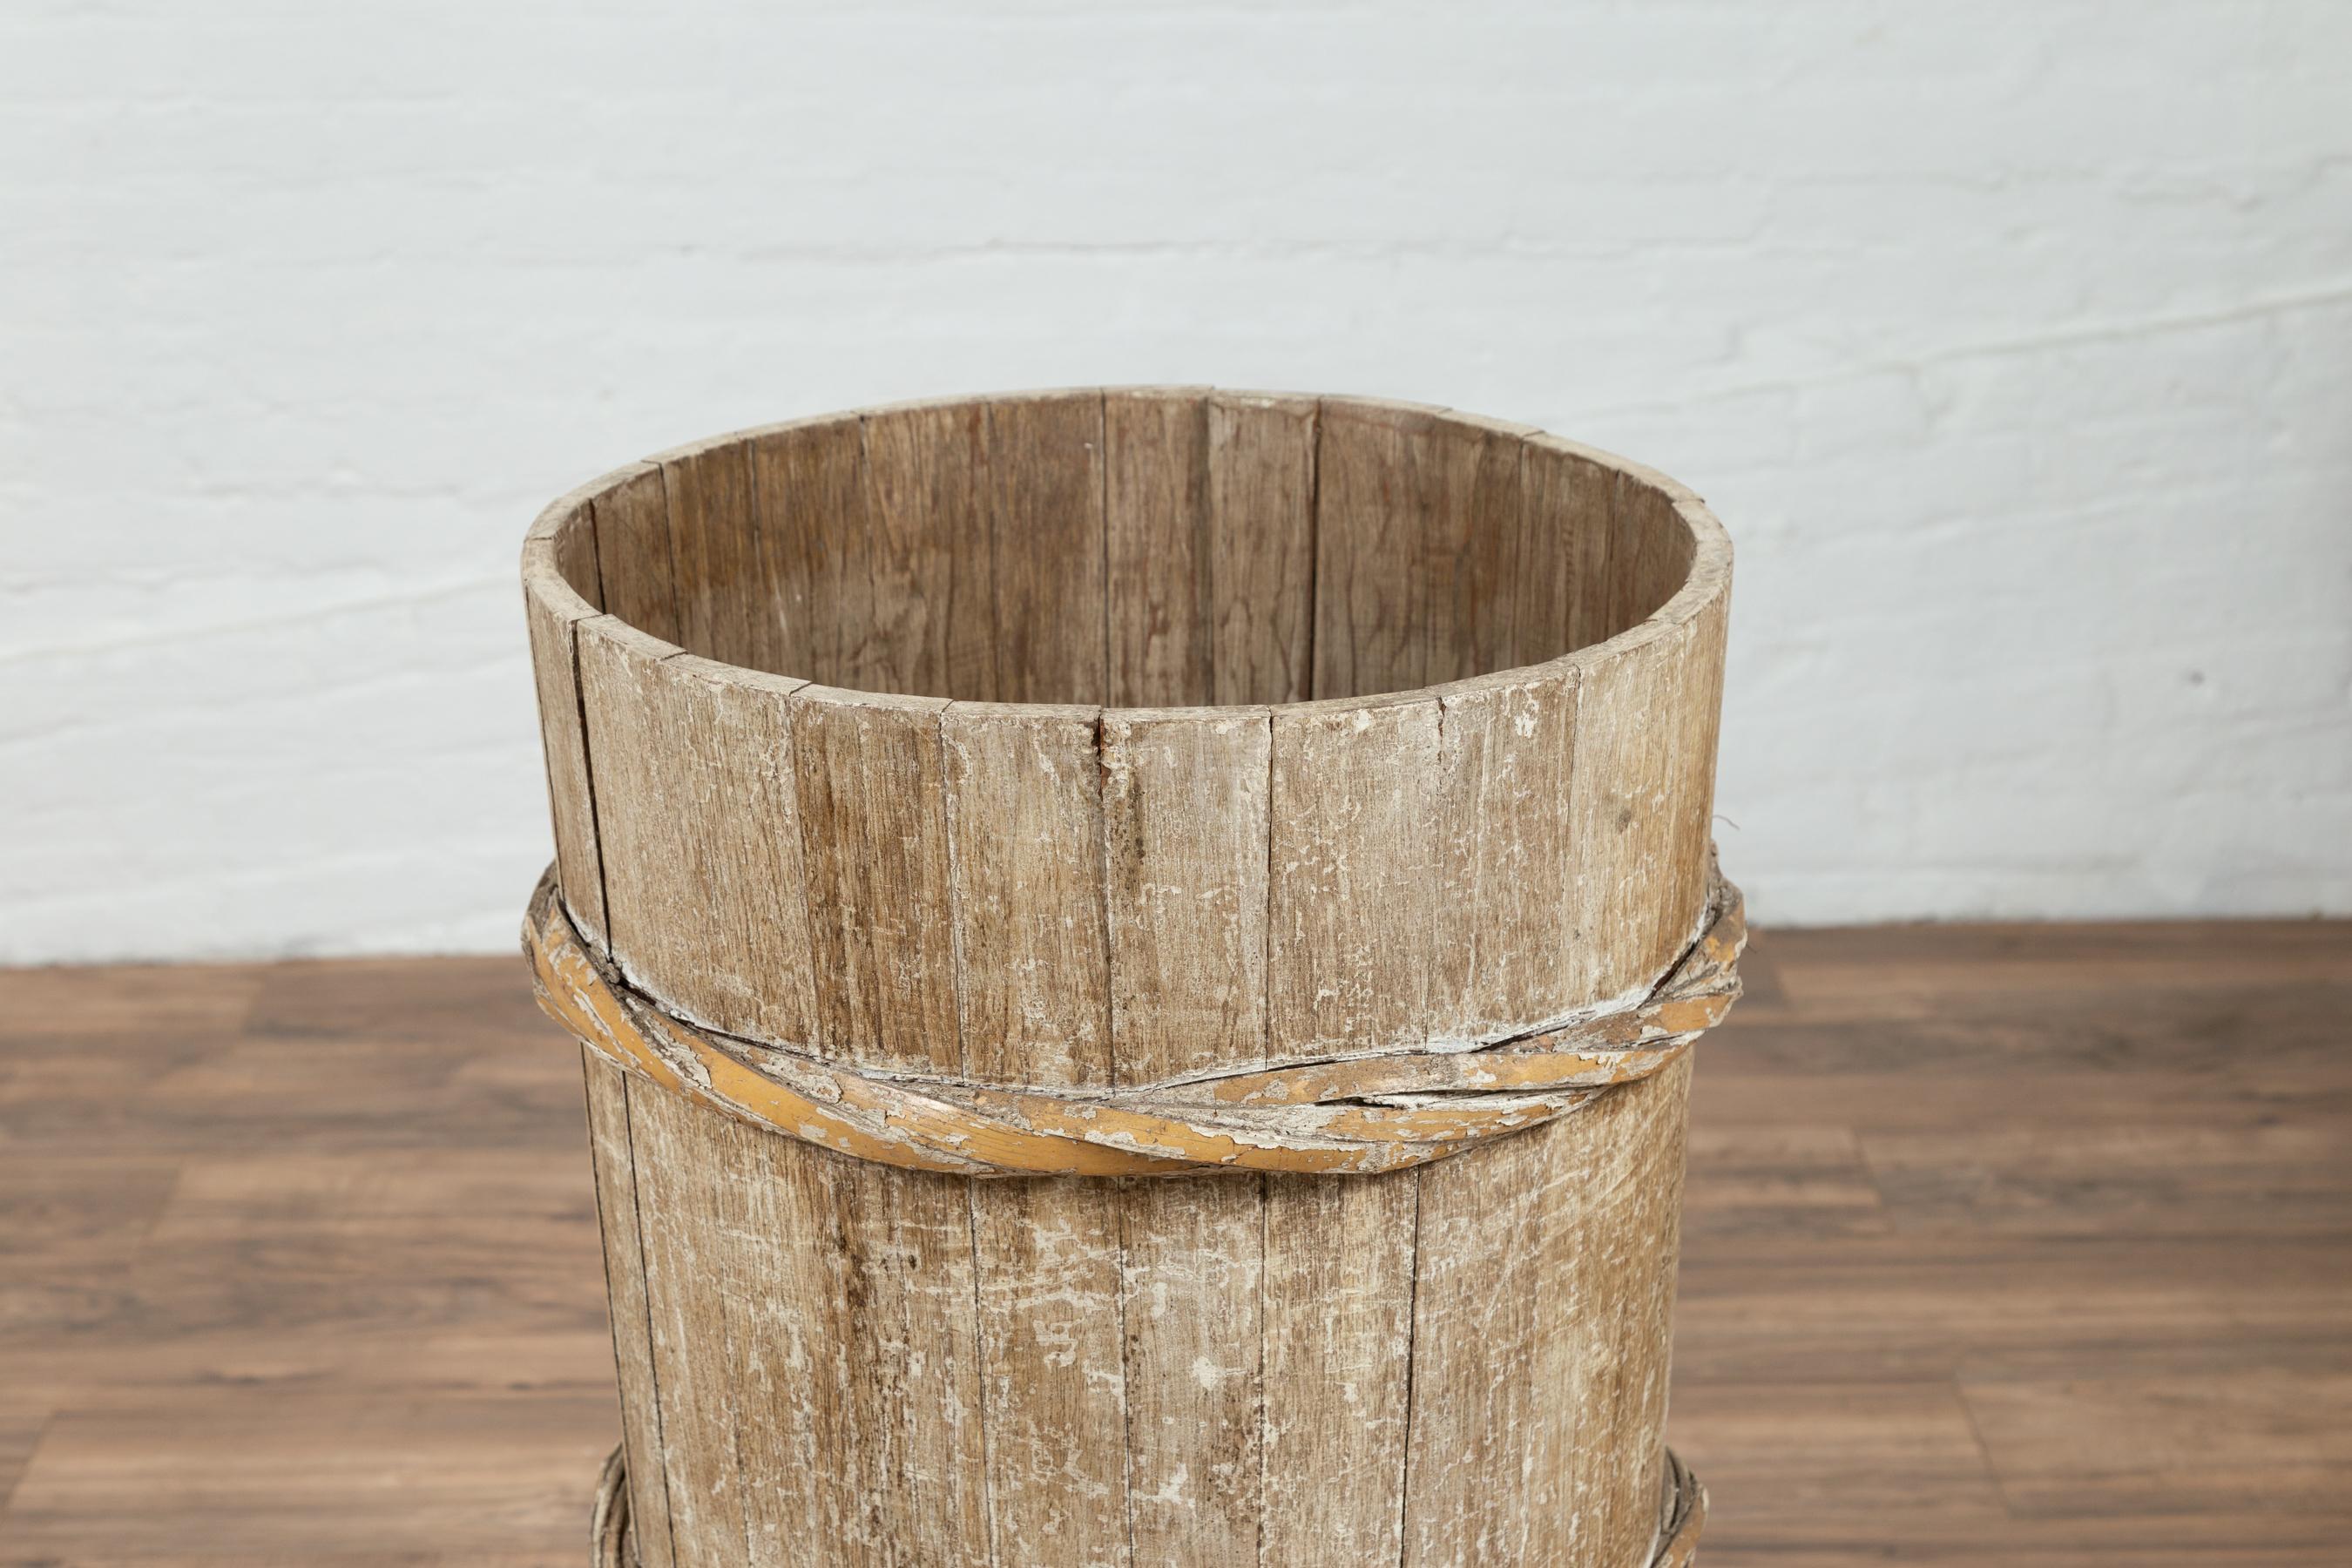 20th Century Tall Vintage Rustic Wooden Barrel with Slatted Body and Rope-Style Motifs For Sale